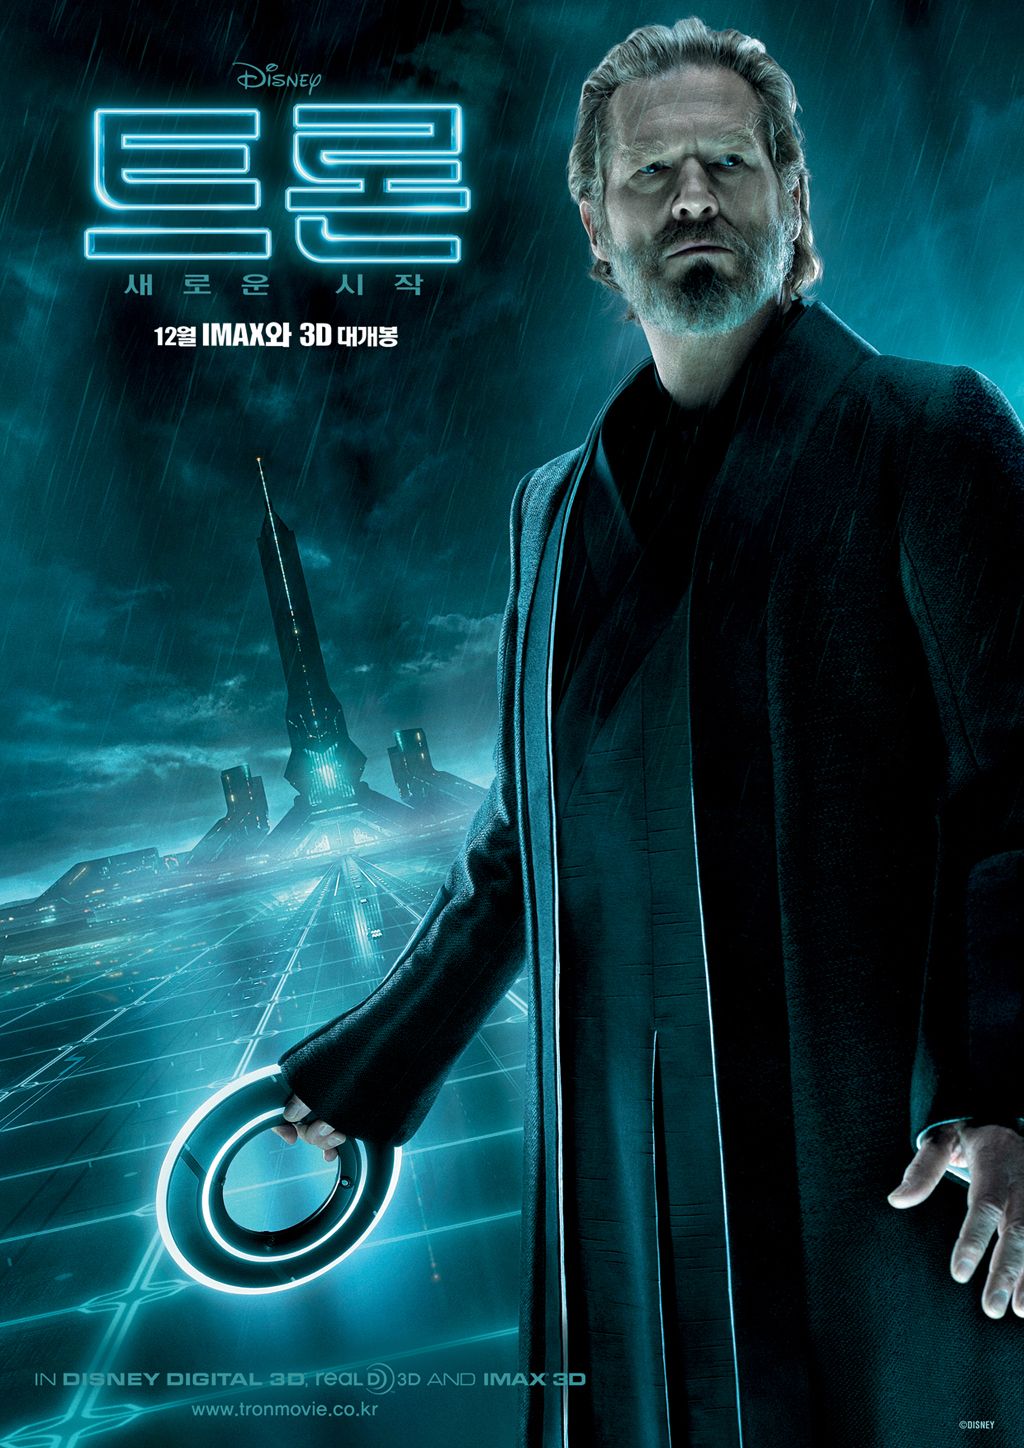 Extra Large Movie Poster Image for Tron Legacy (#14 of 26)